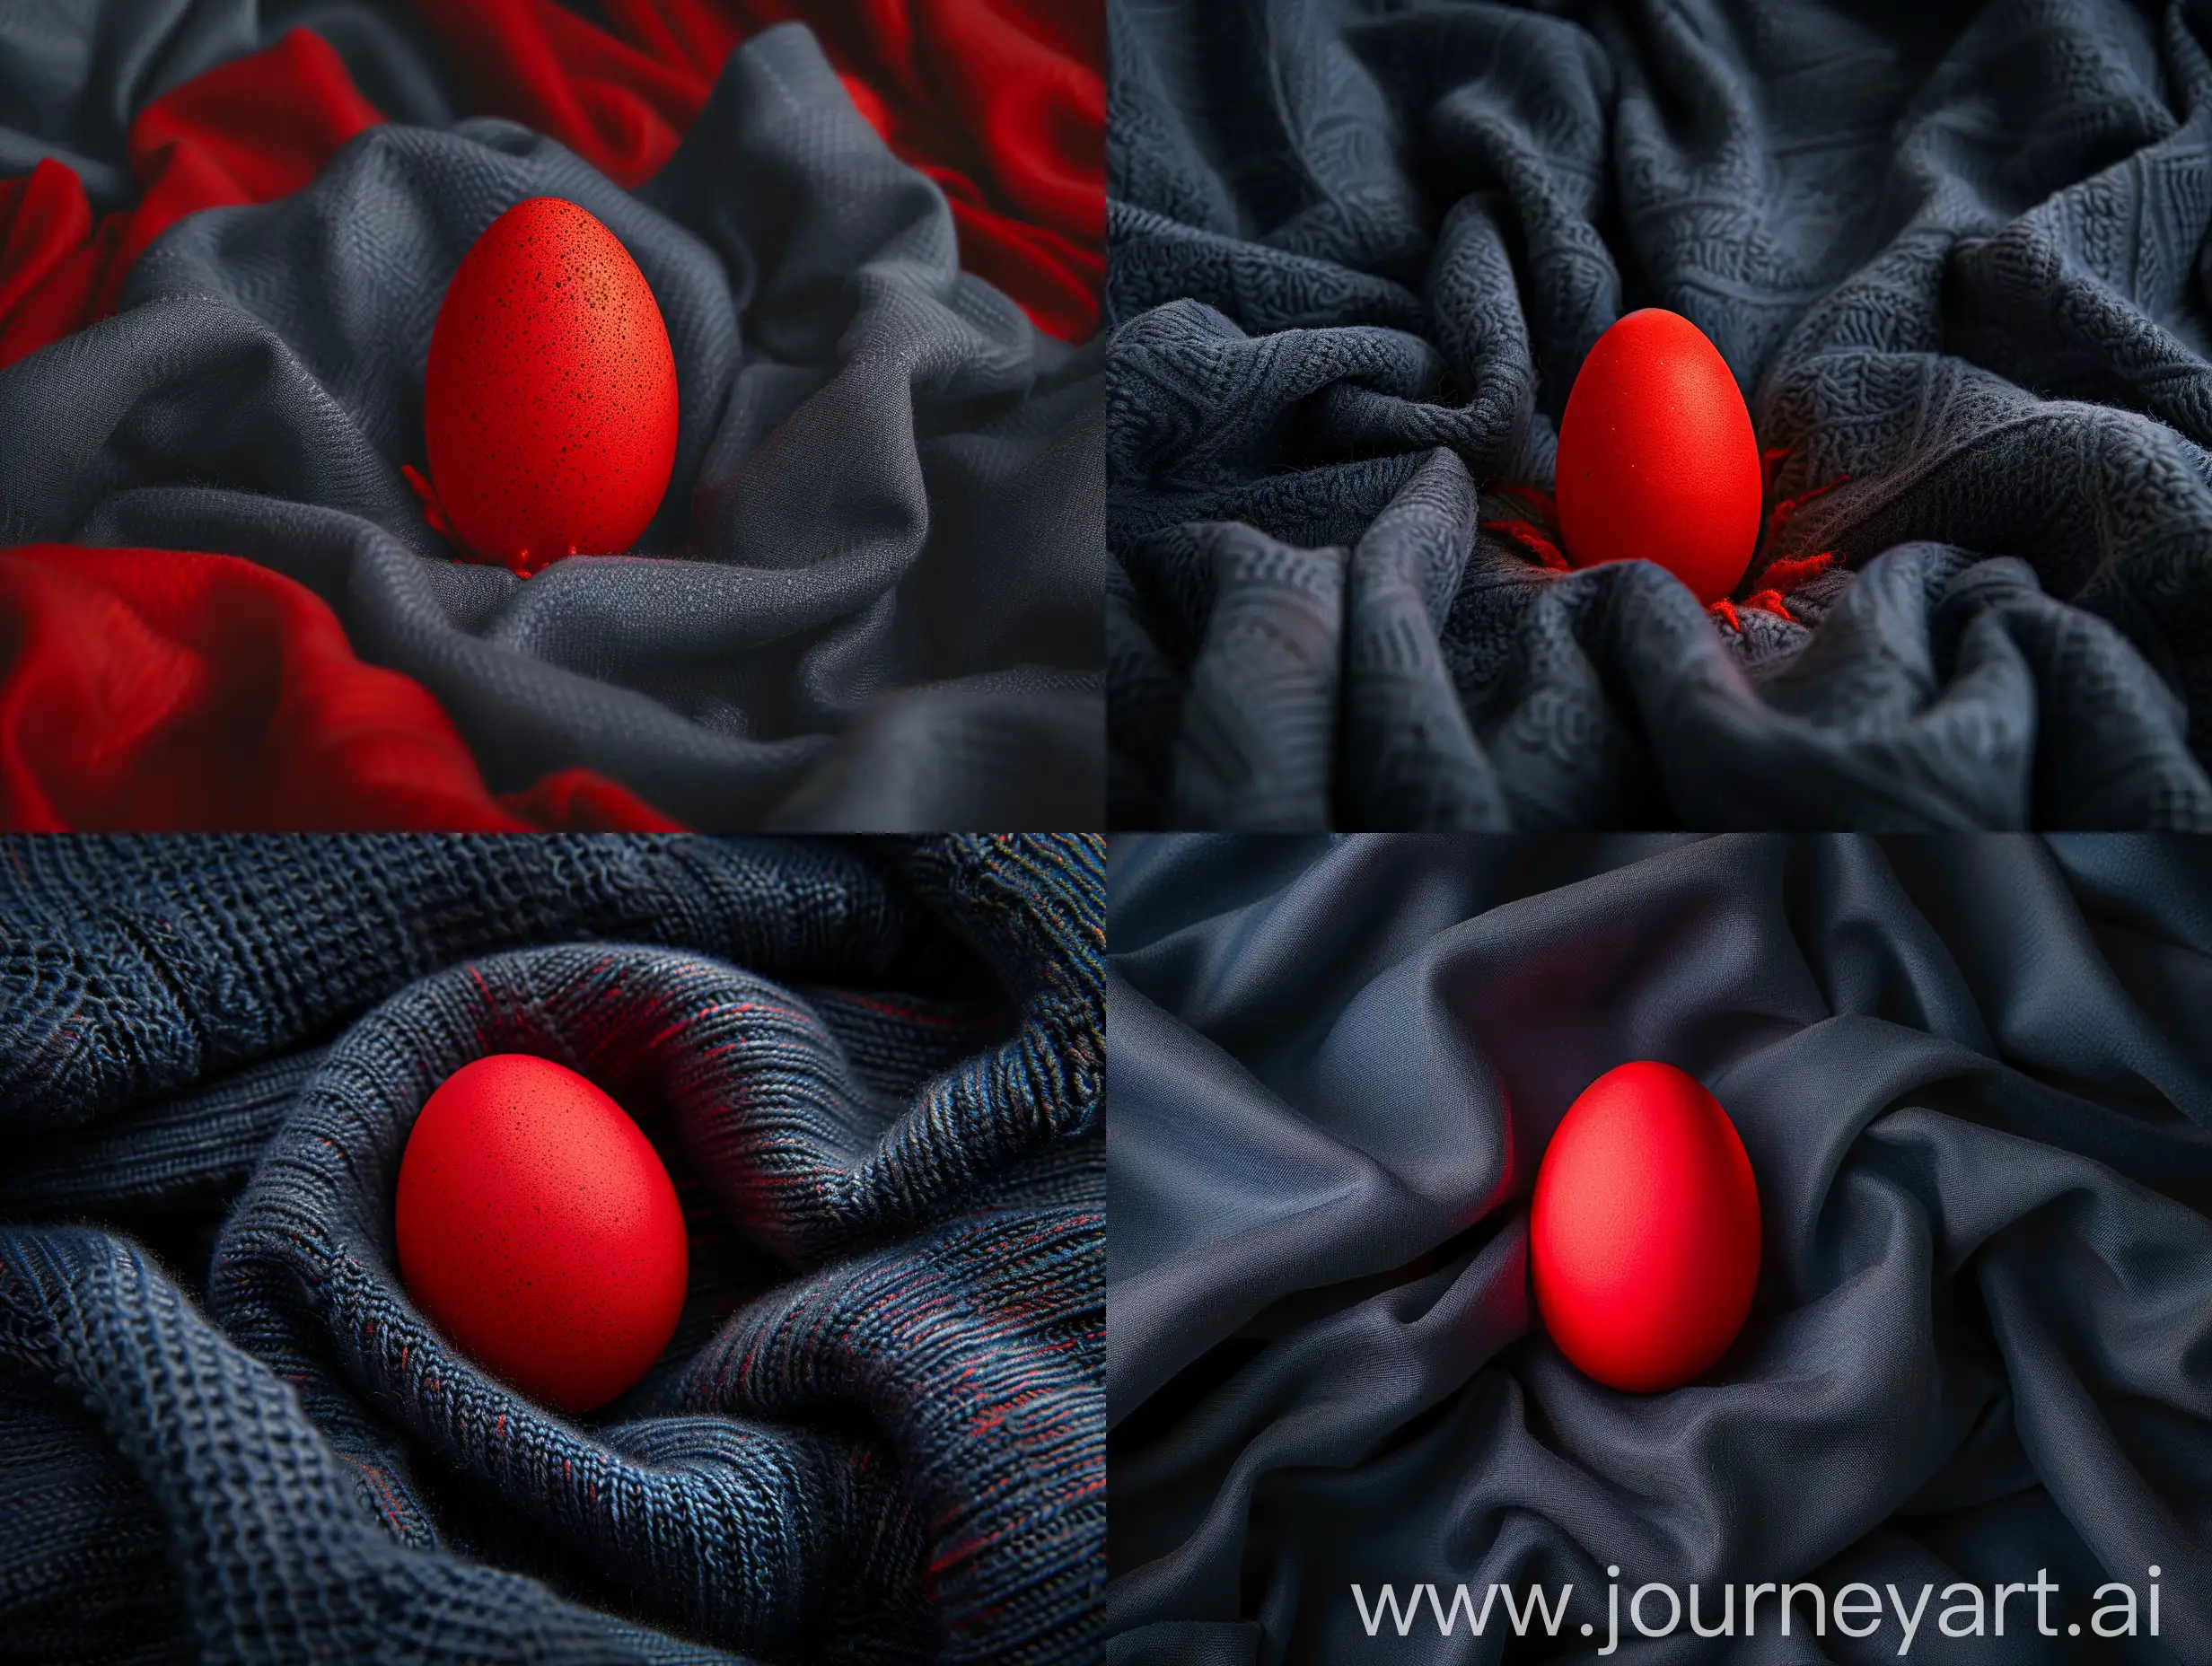 Vibrant-Red-Easter-Egg-on-Dark-Blue-Cotton-Cashmere-Fabric